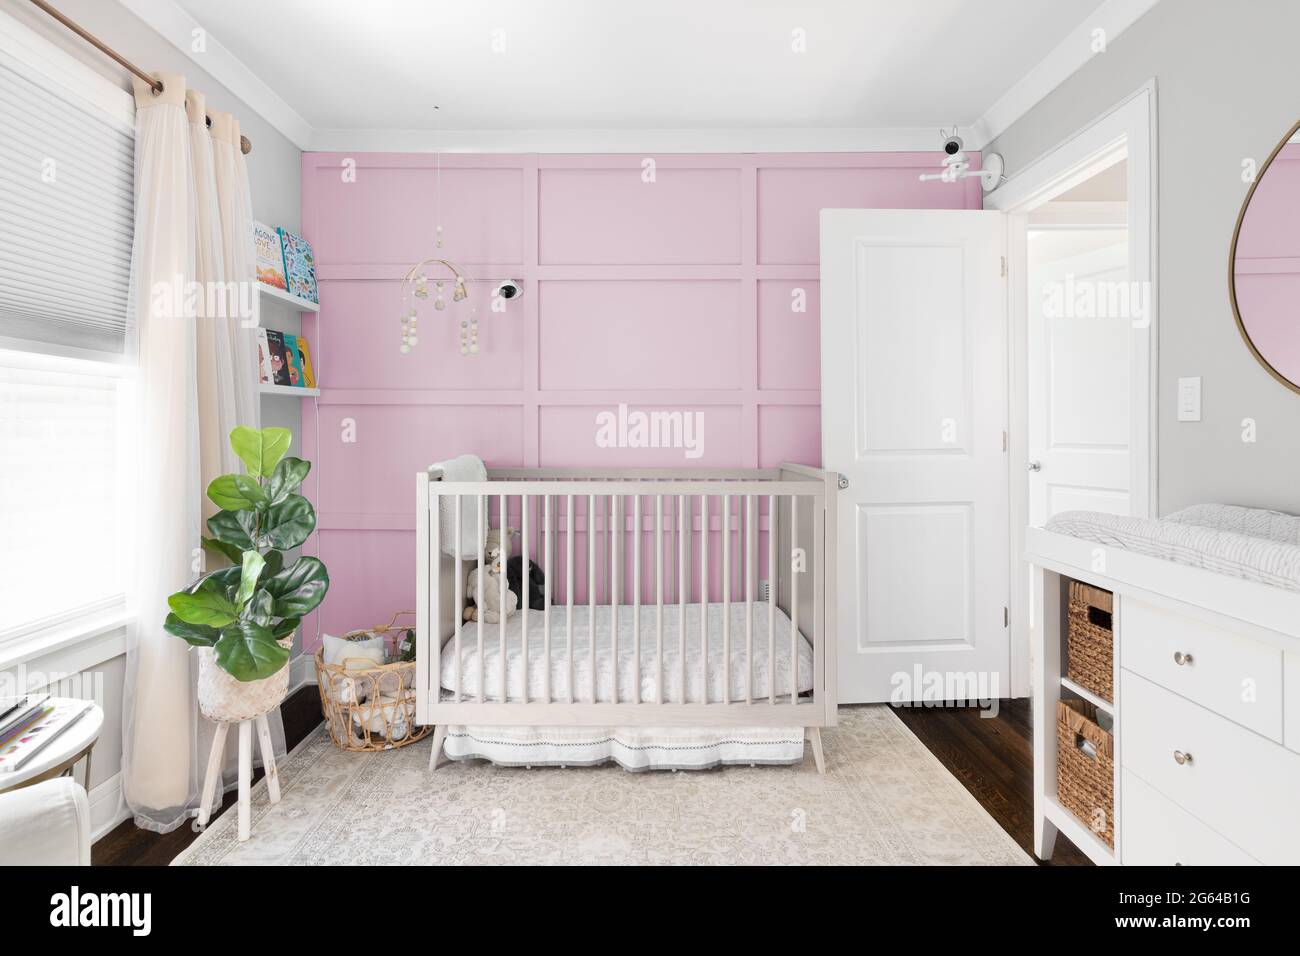 A cozy nursery with a crib in front of a light pink board and batten accent wall. A mobile hangs above the crib and cameras are mounted on the wall. Stock Photo